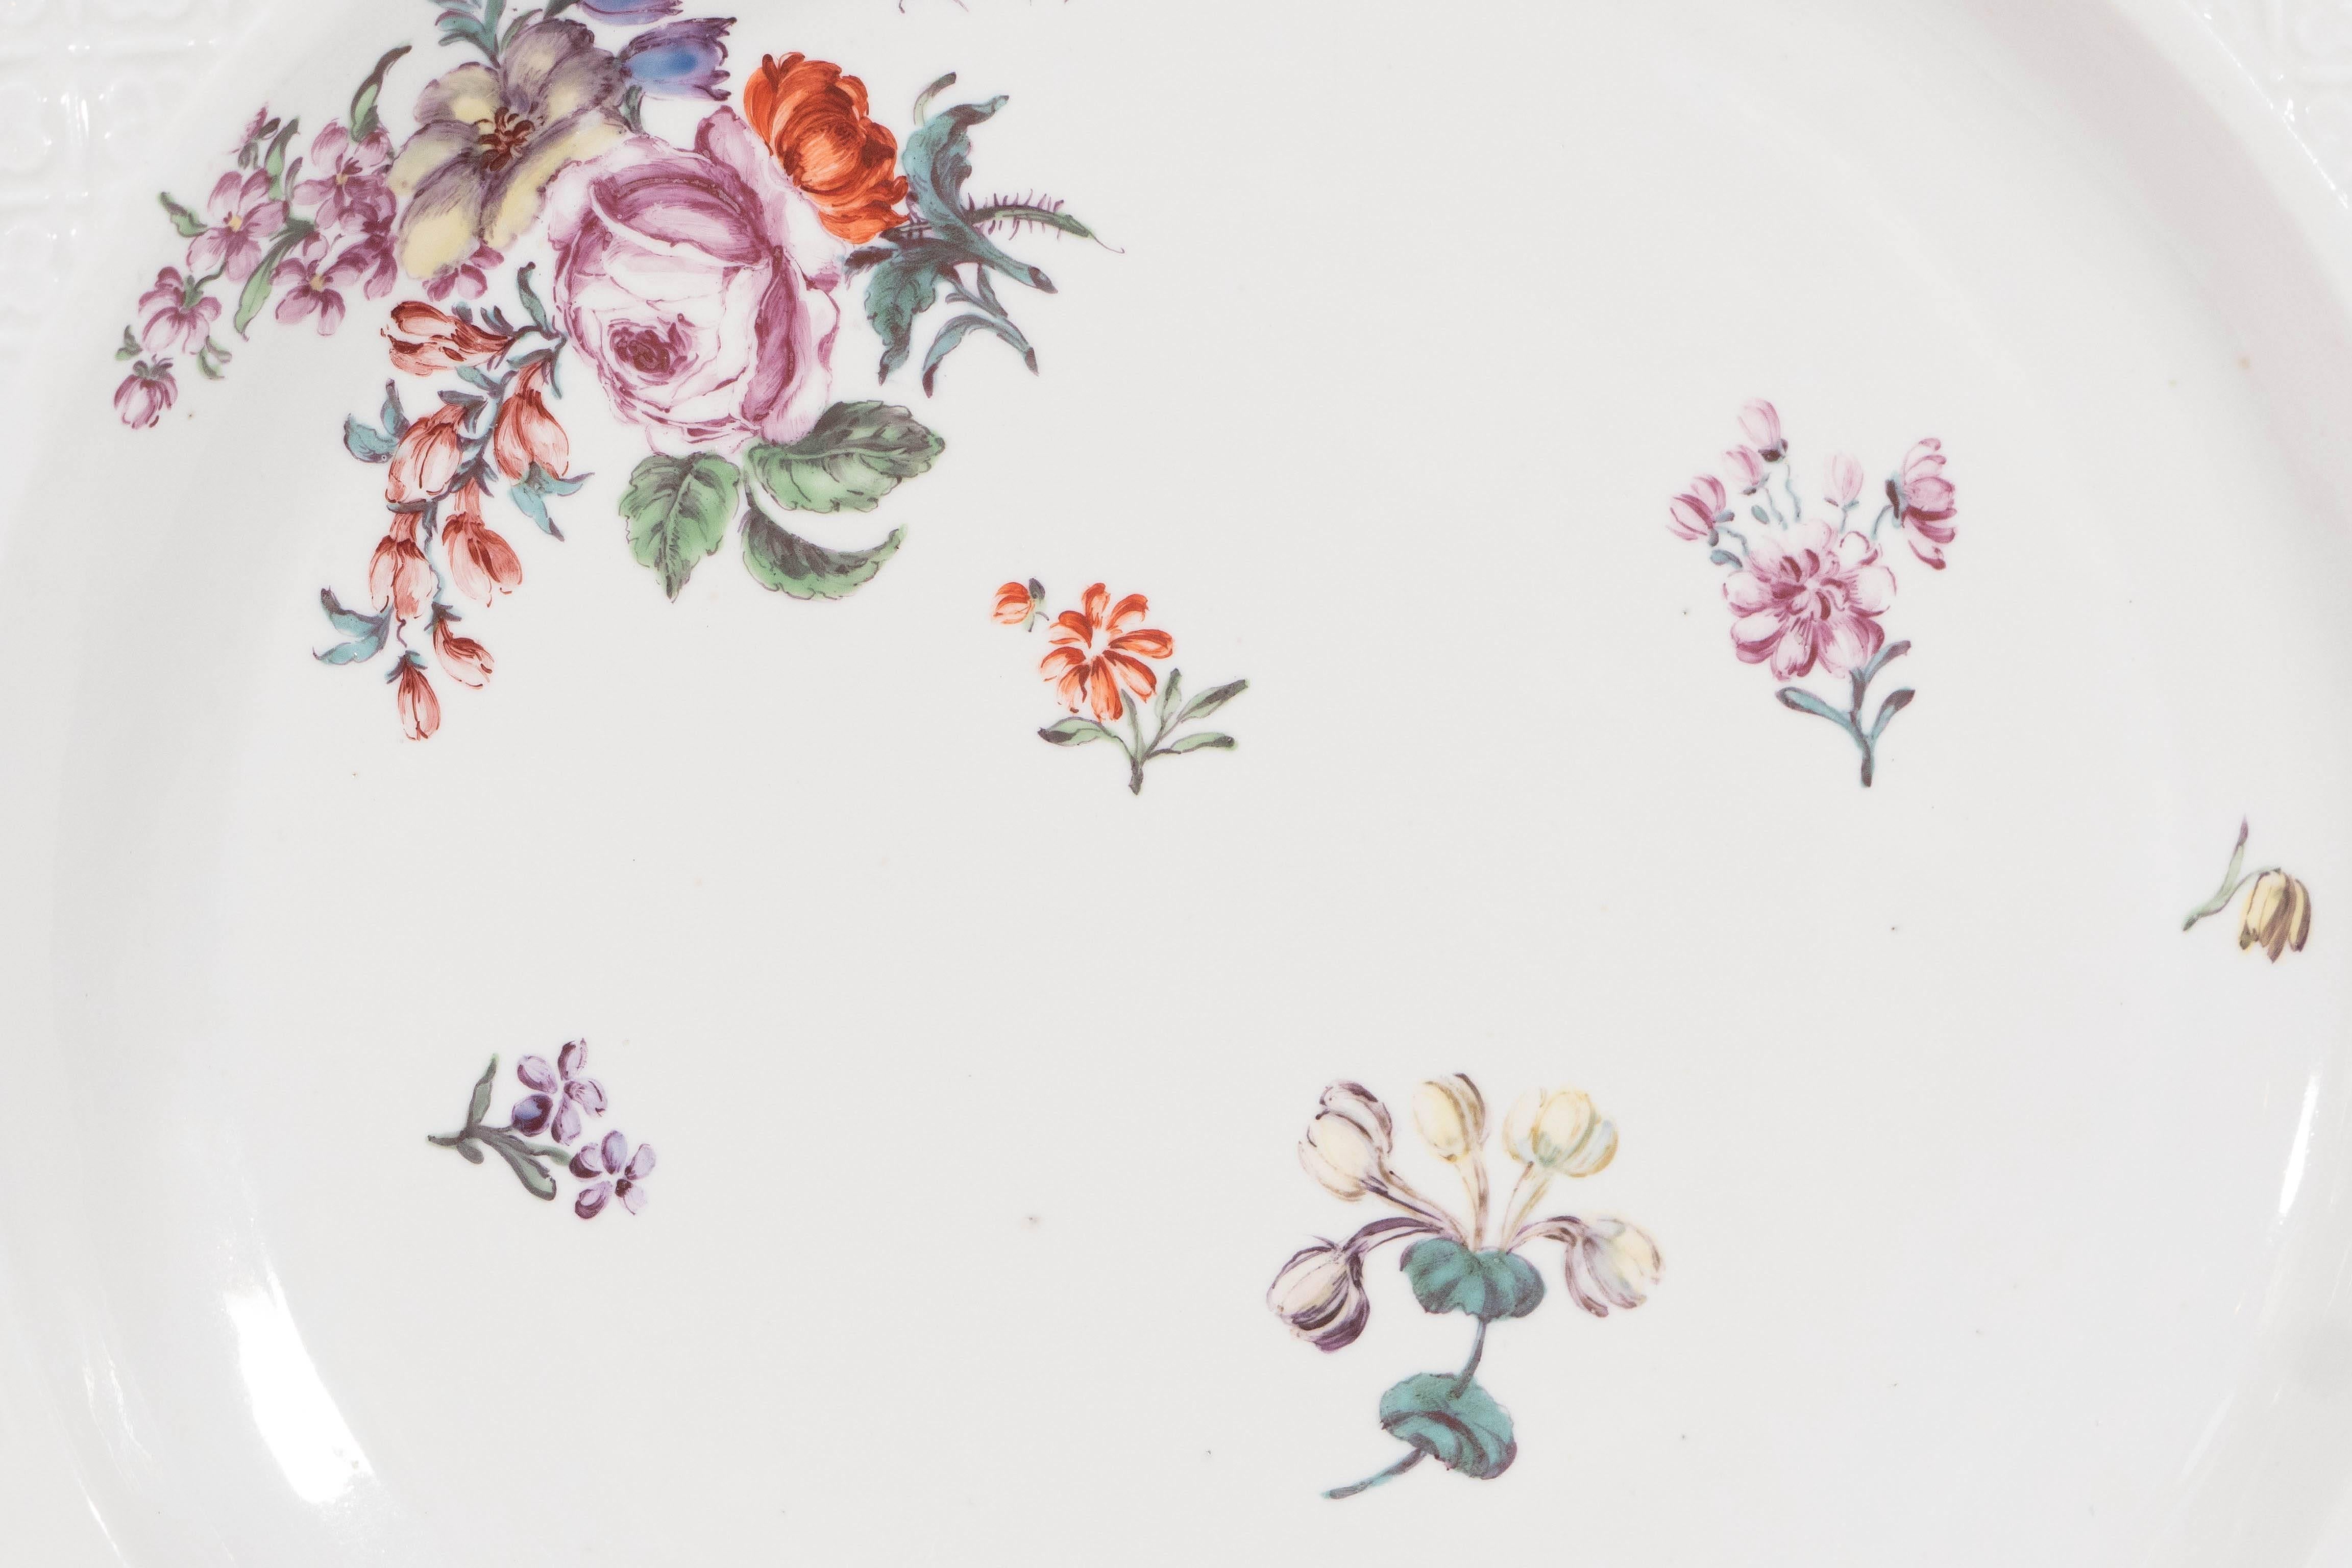 A Chelsea octagonal dish made in the red anchor period (1752-1756). Inspired by the original Meissen porcelains early Chelsea tableware decorated with European flowers and insects was popular from the late 1740s until, circa 1758. This octagonal